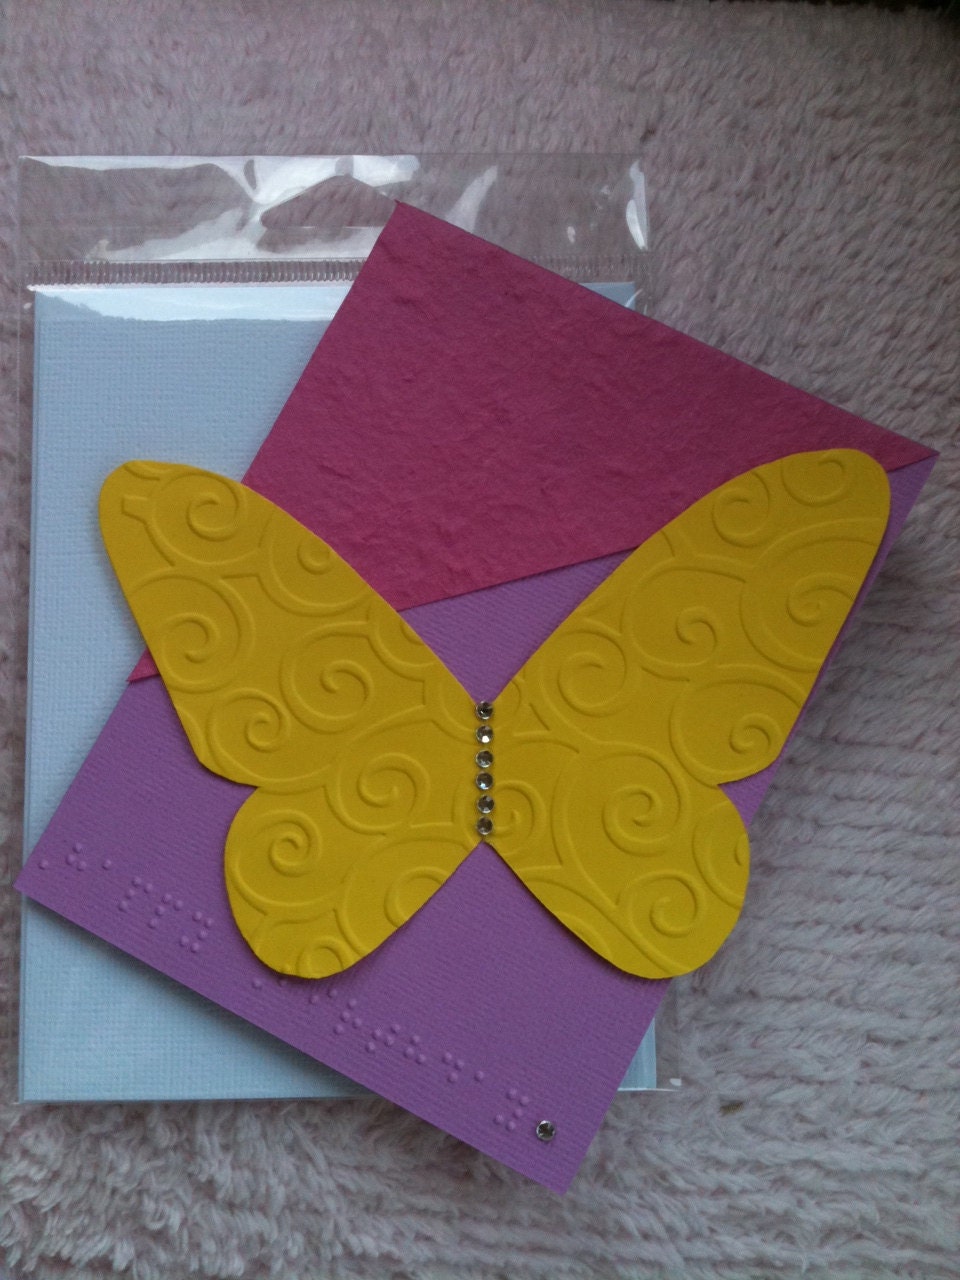 Butterfly Birthday Card with Braille "Happy Birthday"